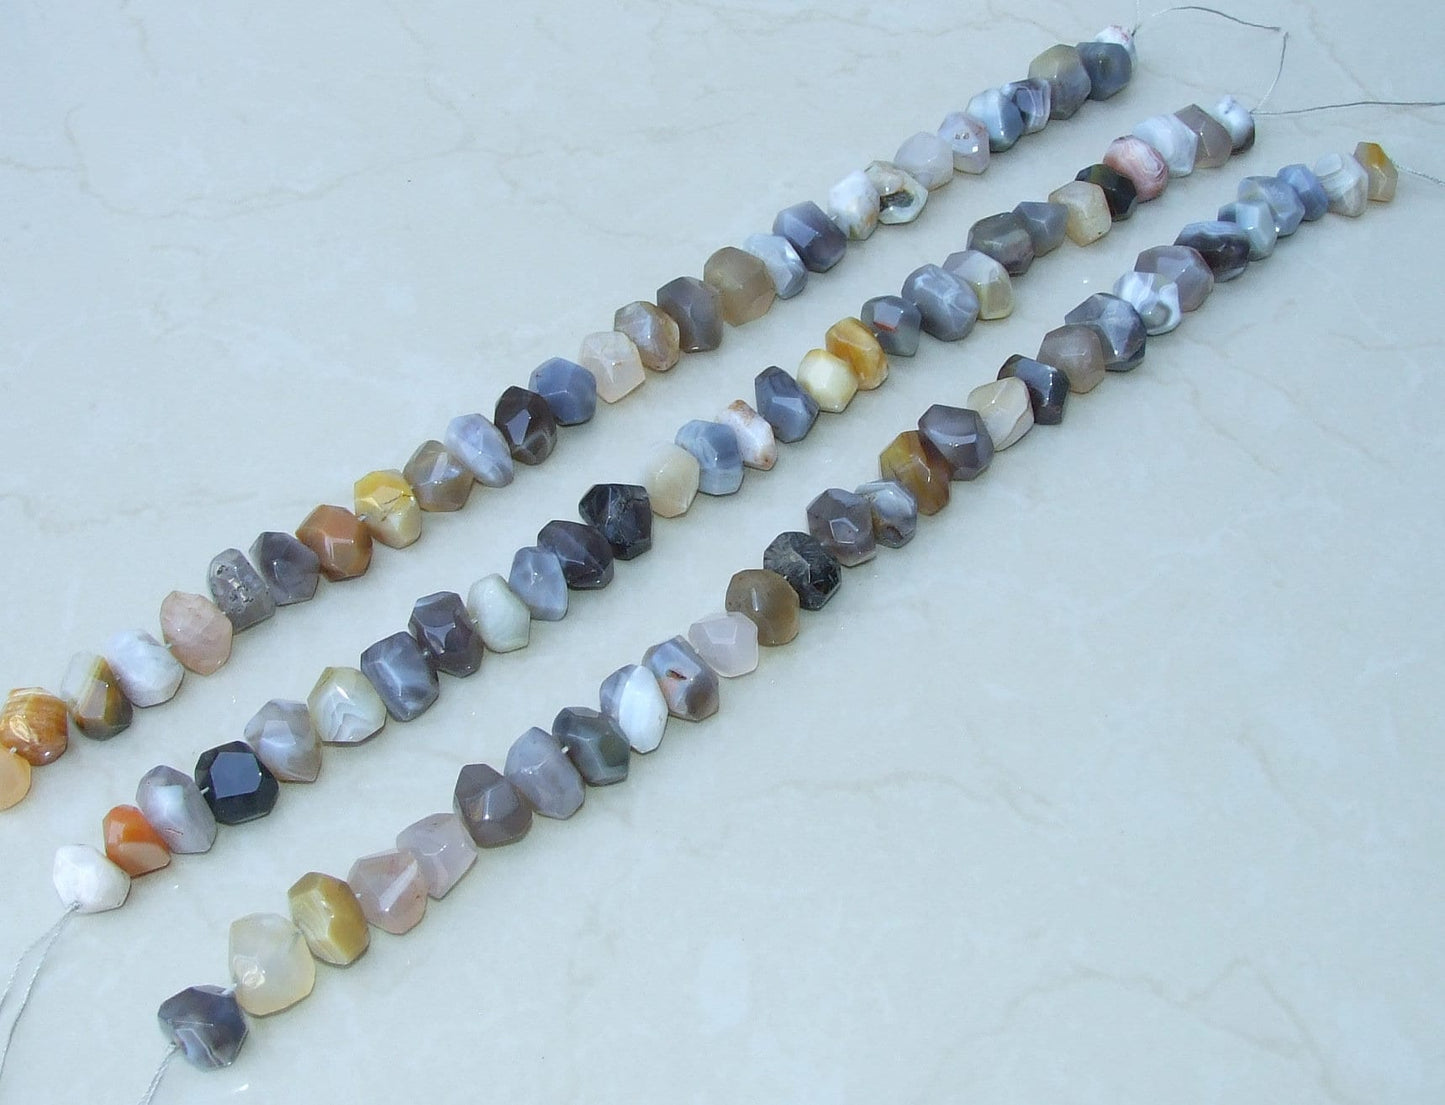 Botswana Agate Faceted Nugget, Gemstone Beads, Polished Botswana Agate, Botswana Agate Bead, Half Strand, Cross Drilled, 15mm x 15mm x 20mm